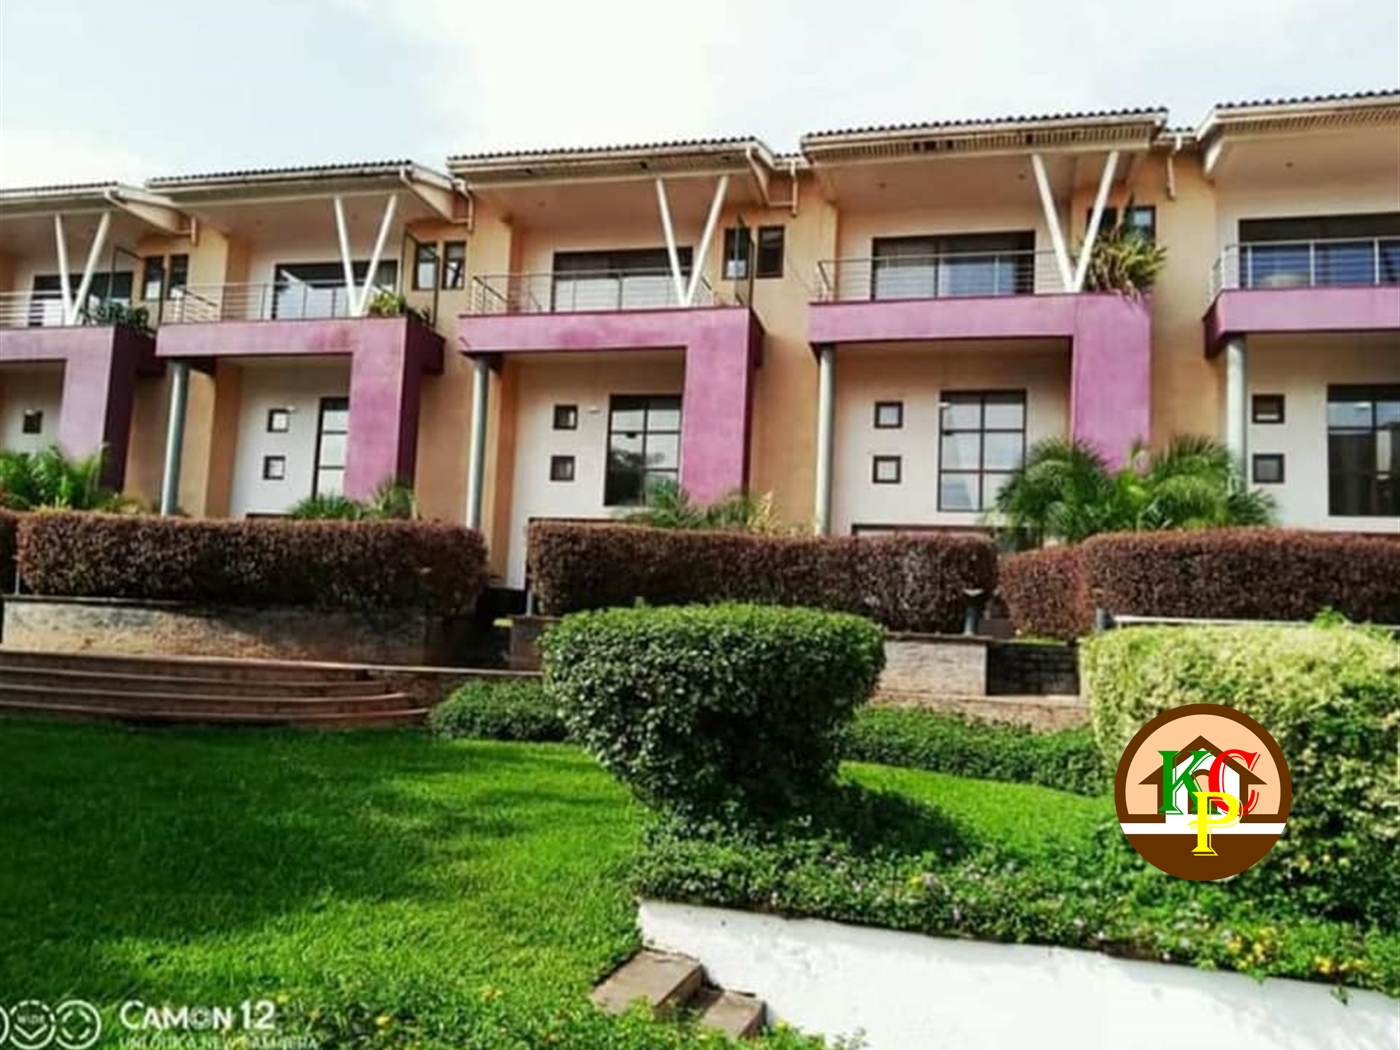 Apartment block for sale in Mbuya Kampala